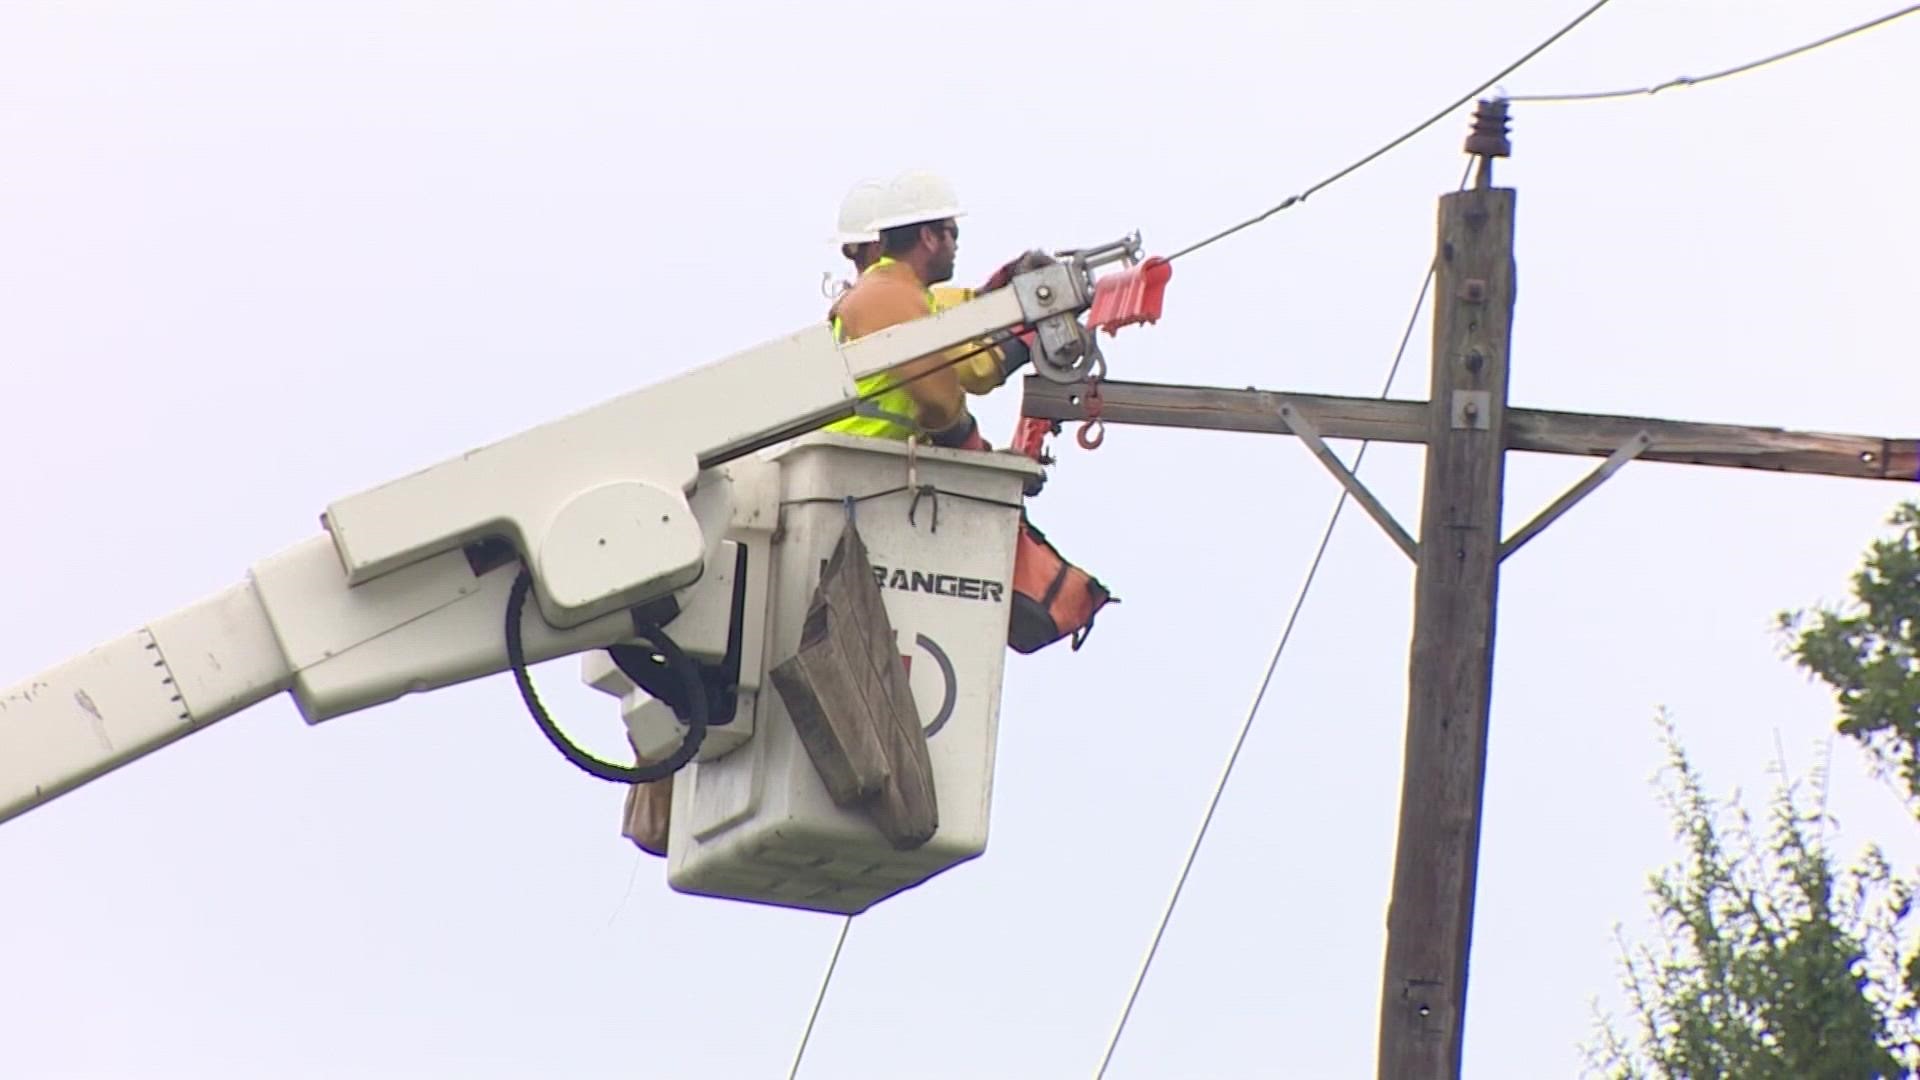 KHOU 11's Michelle Choi reports on power outages as of 6 a.m. Thursday, Sept. 16